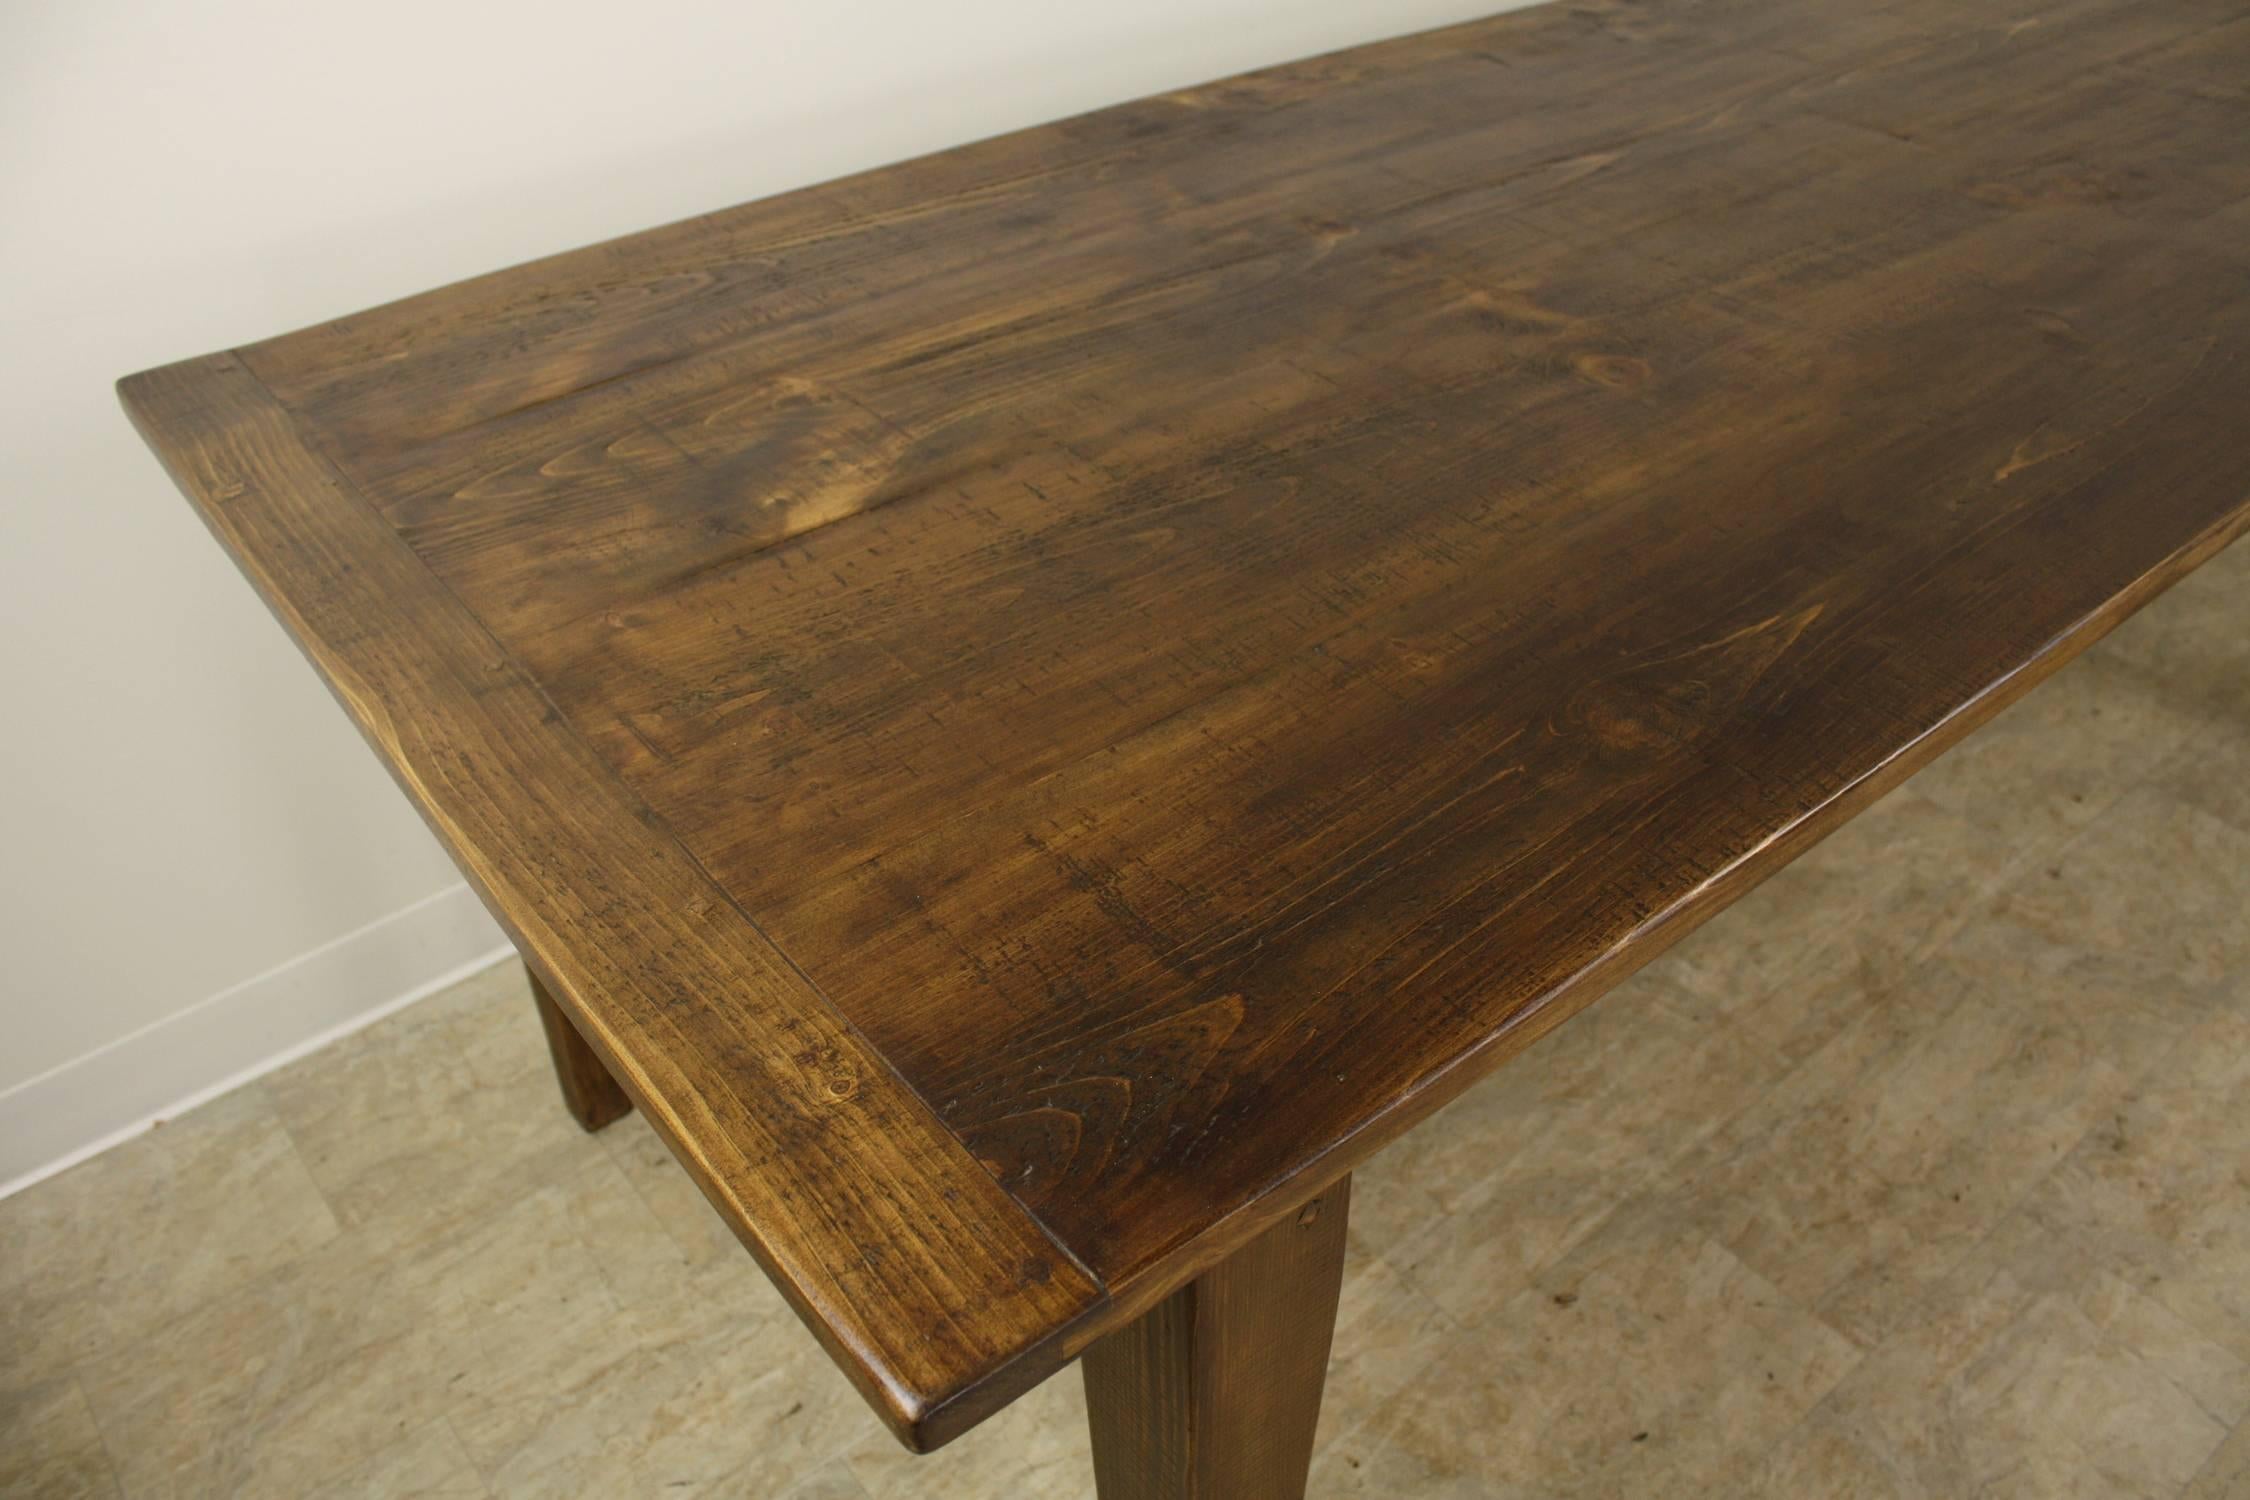 Contemporary 7 Foot Light Pine Farm Table with Breadboard Ends